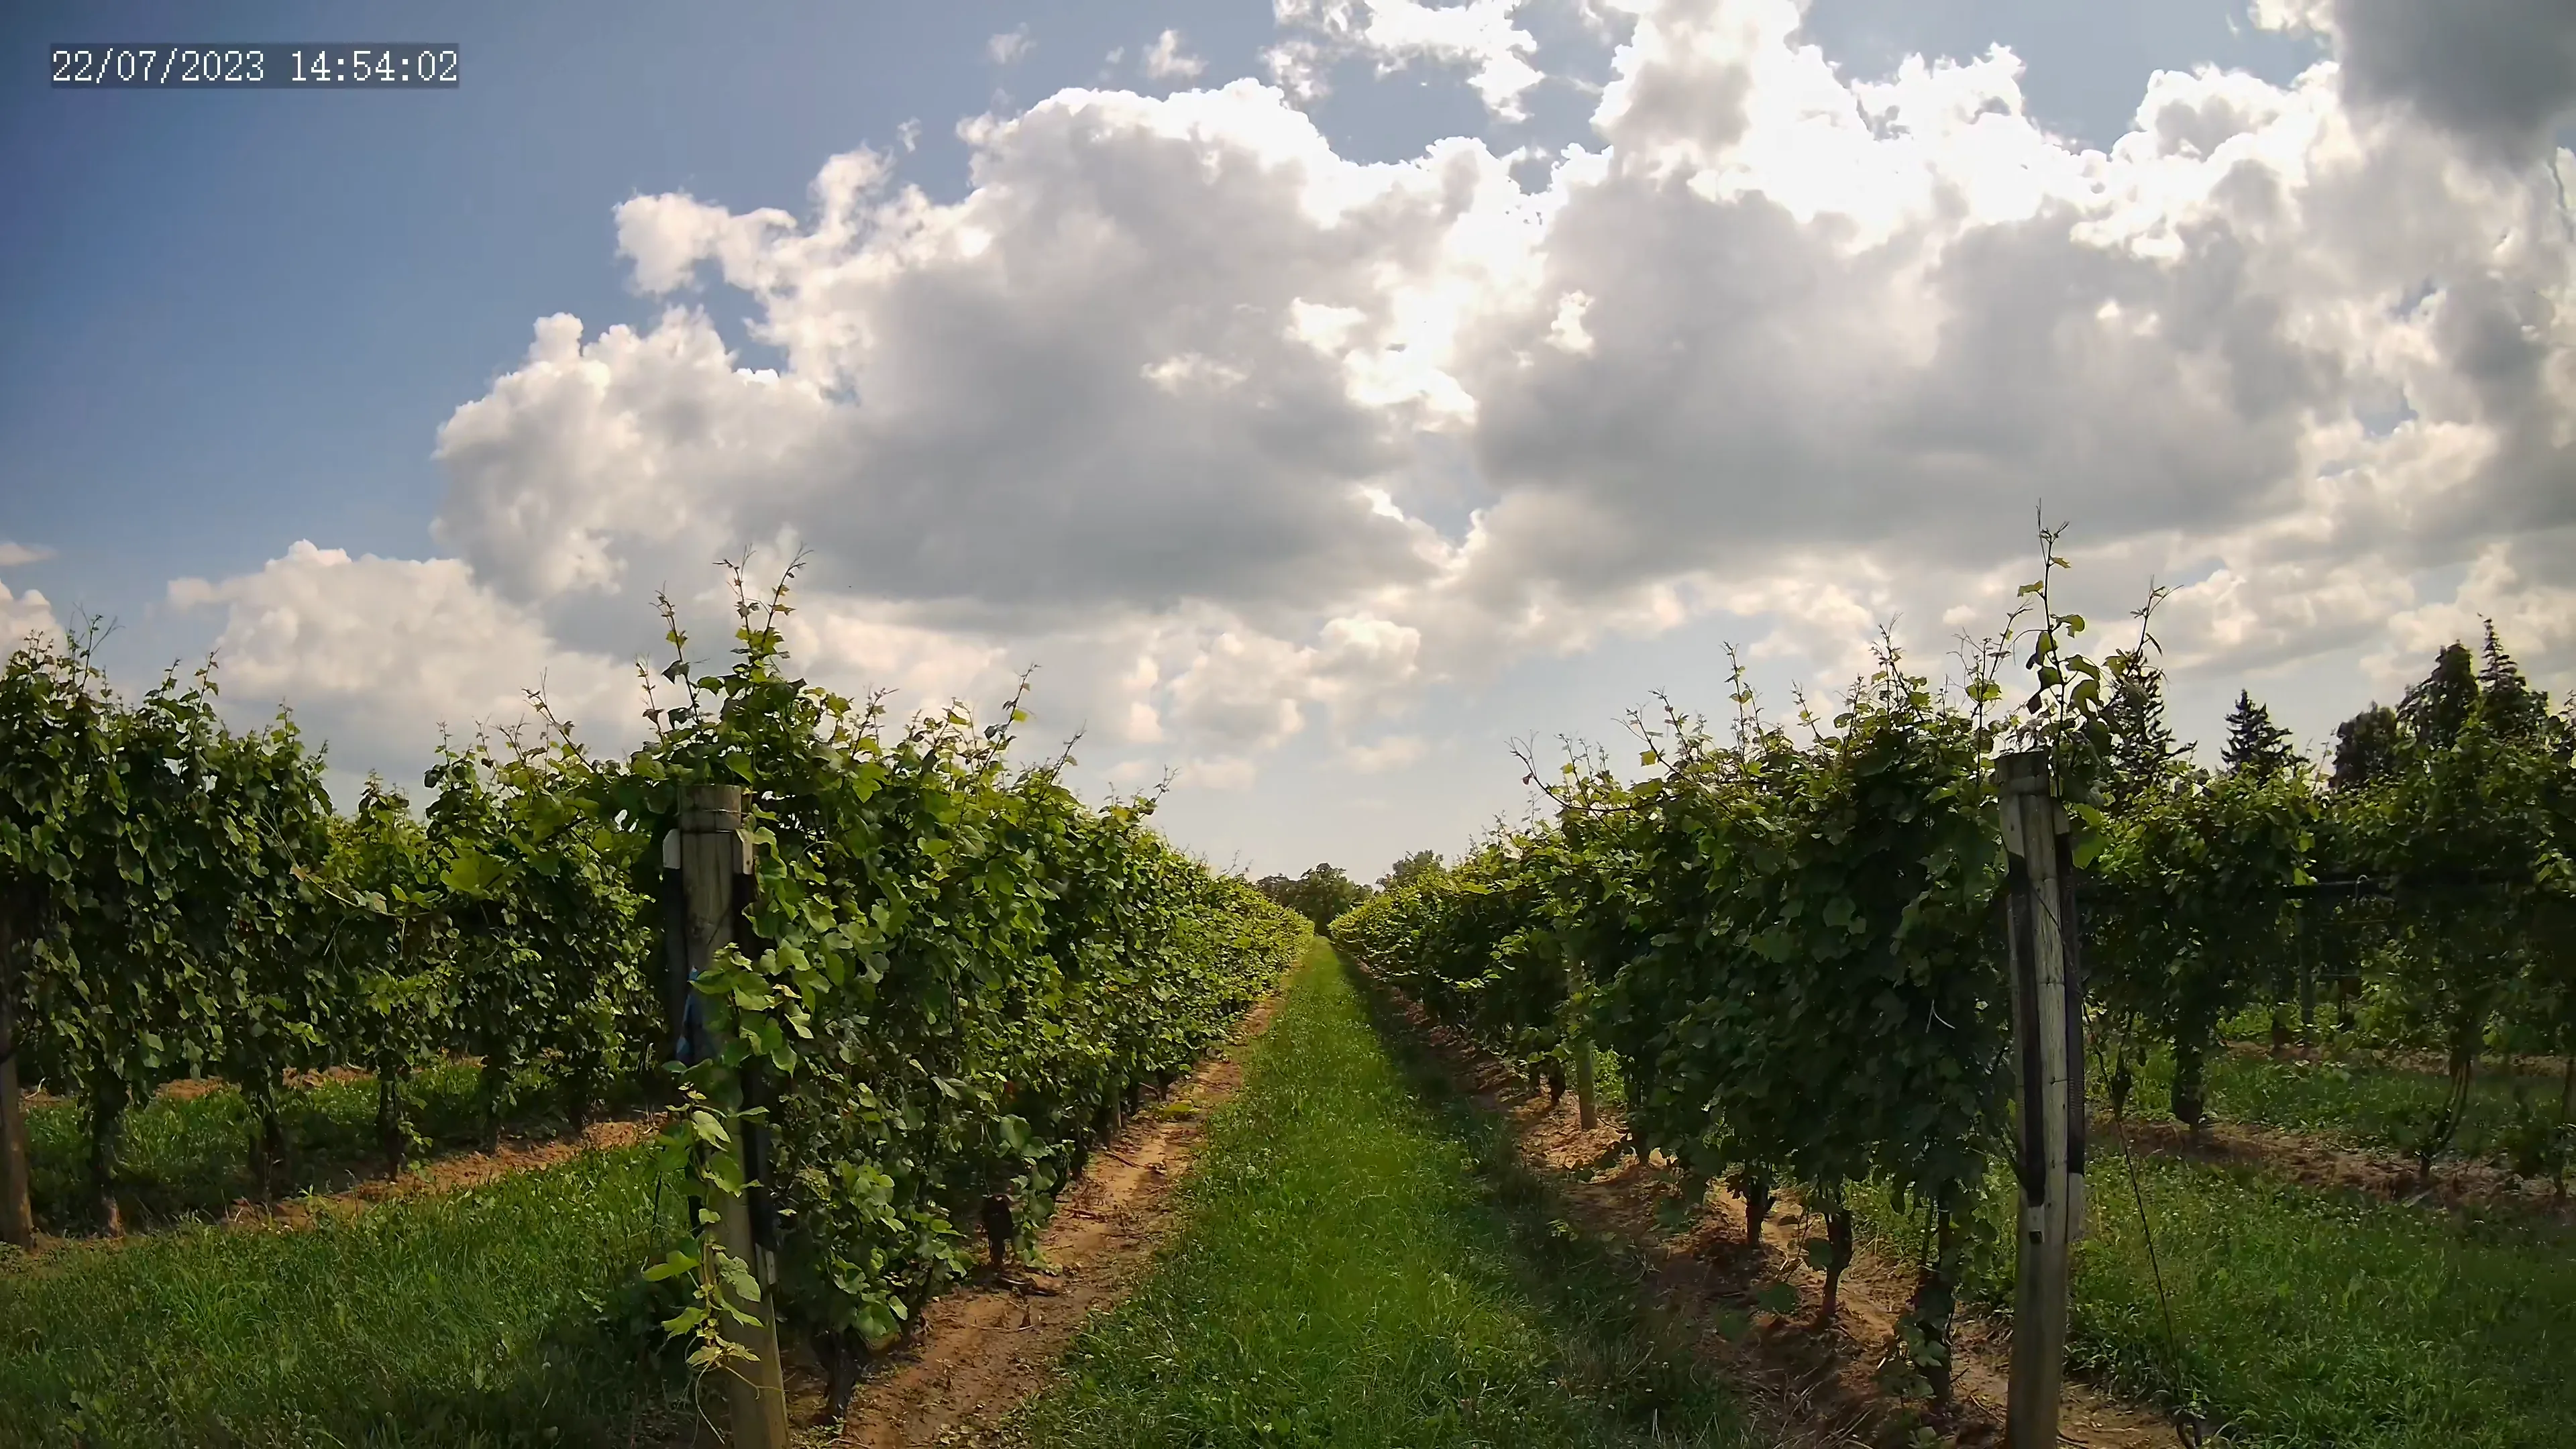 A row of grapevines in a Canadian wineyard, blue sky with white clouds in the background